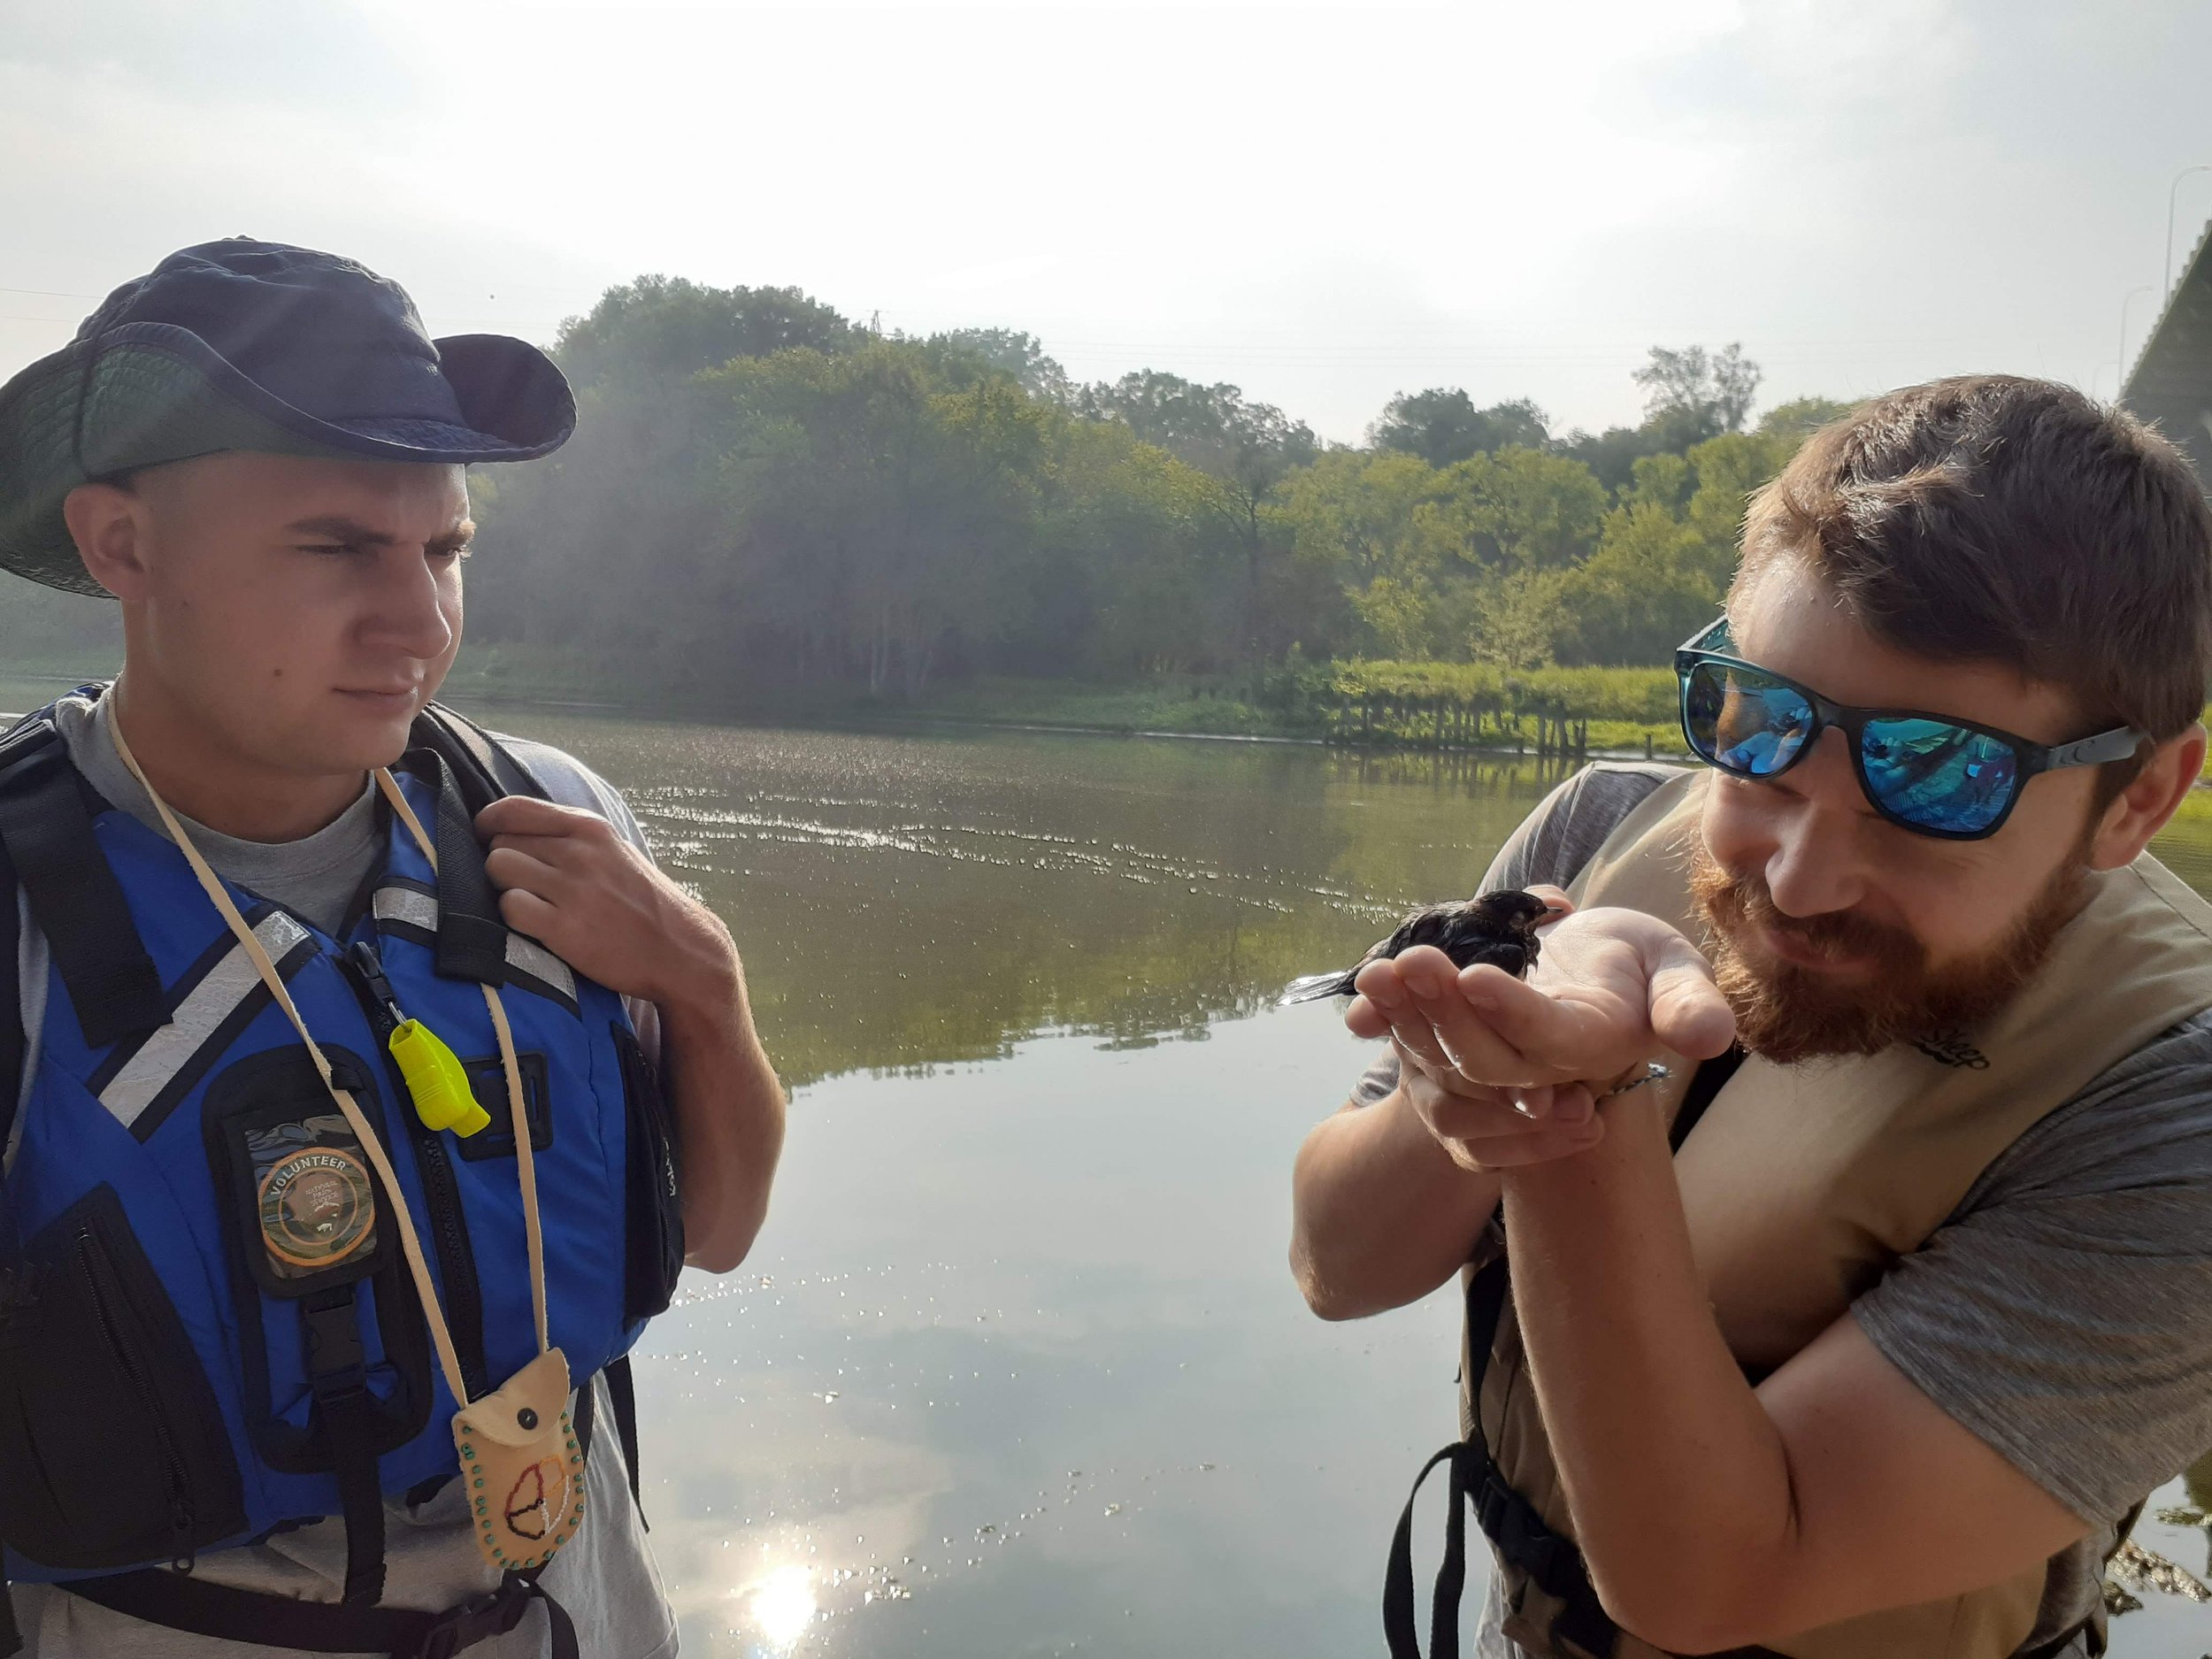  A person holds a bird in his hand while another person watches. They are both wearing life jackets and standing near water. 